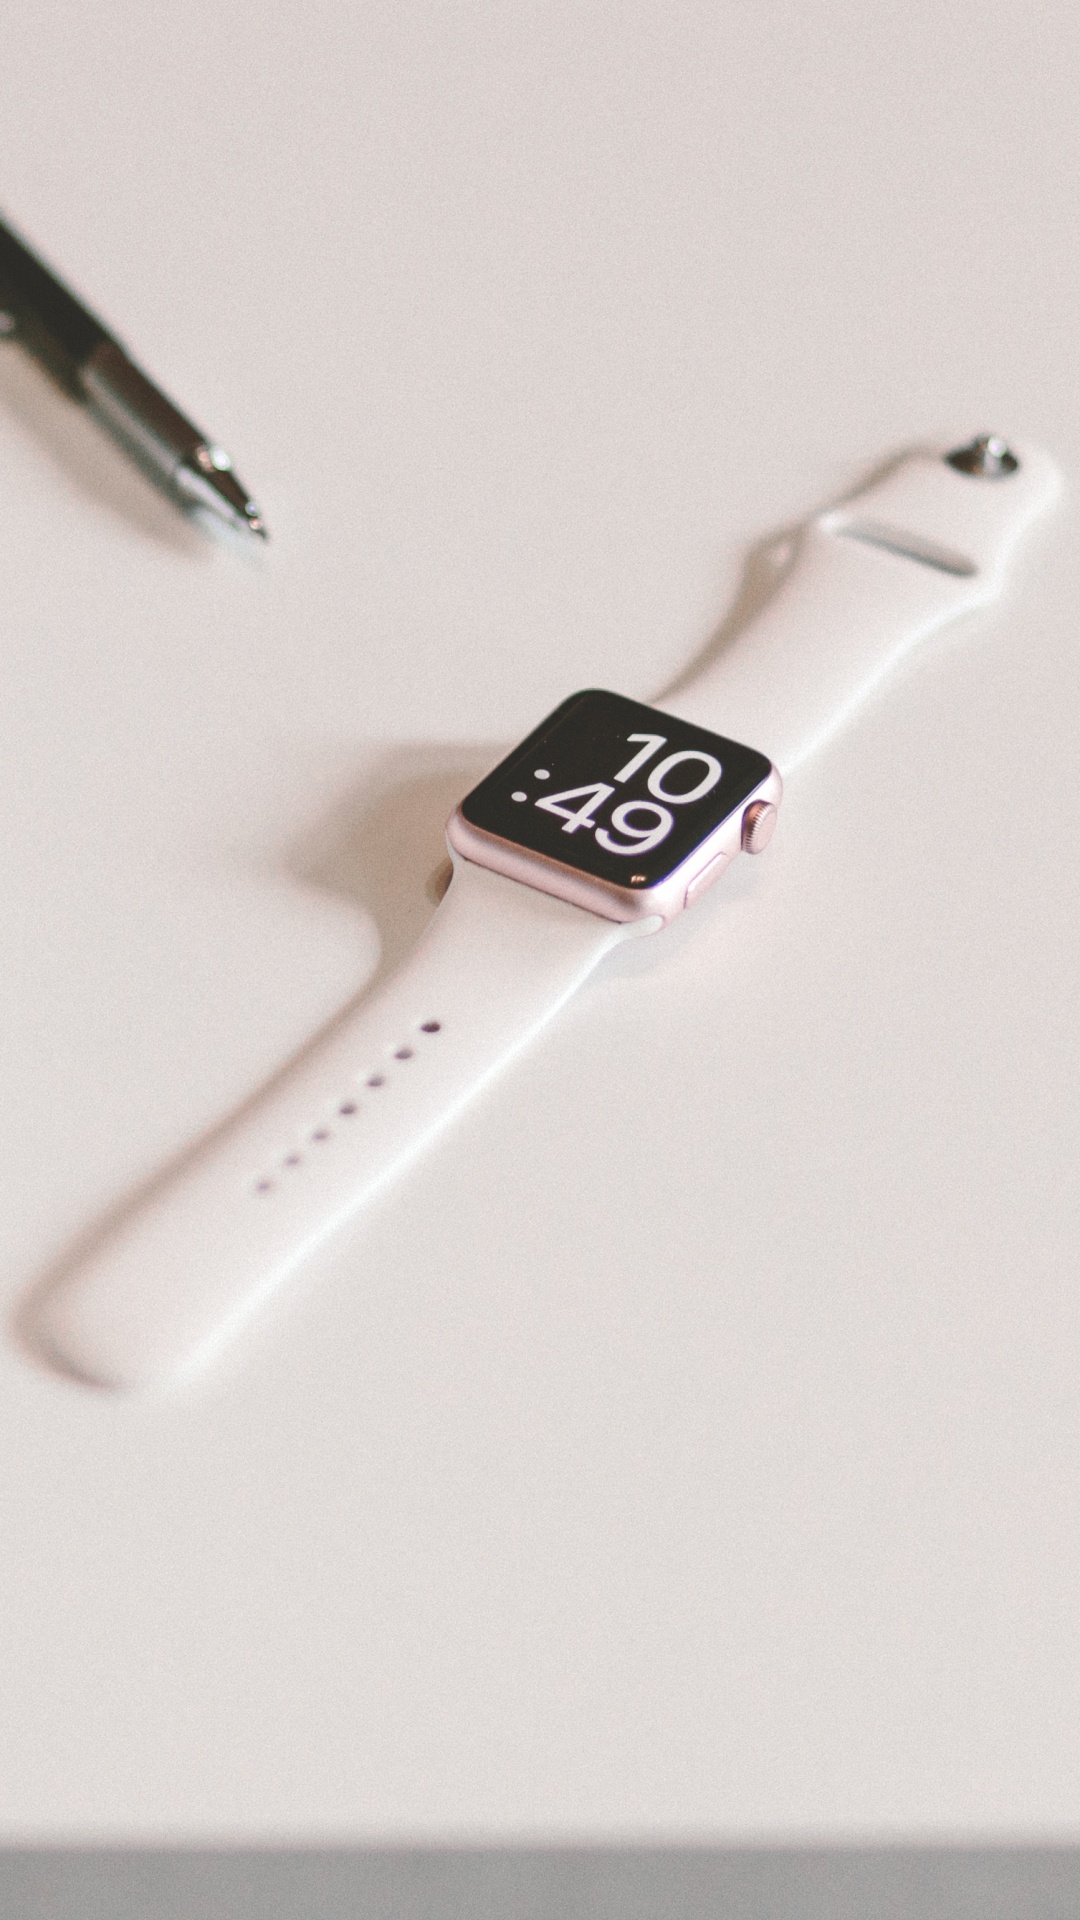 Silver Apple Watch With White Sport Band Beside Black Click Pen. Wallpaper in 1080x1920 Resolution